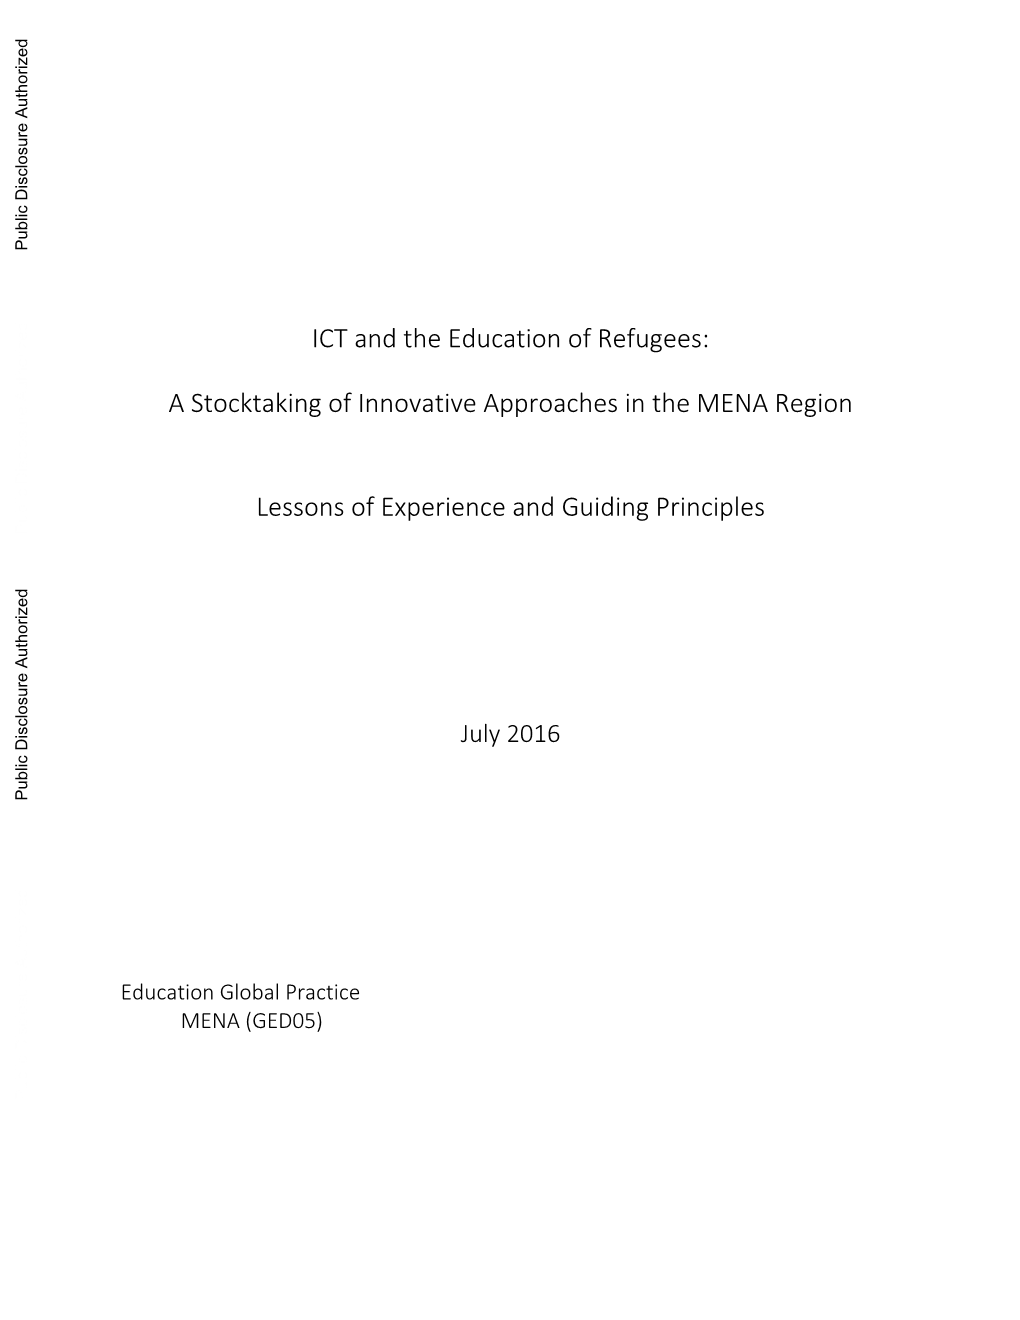 ICT and the Education of Refugees